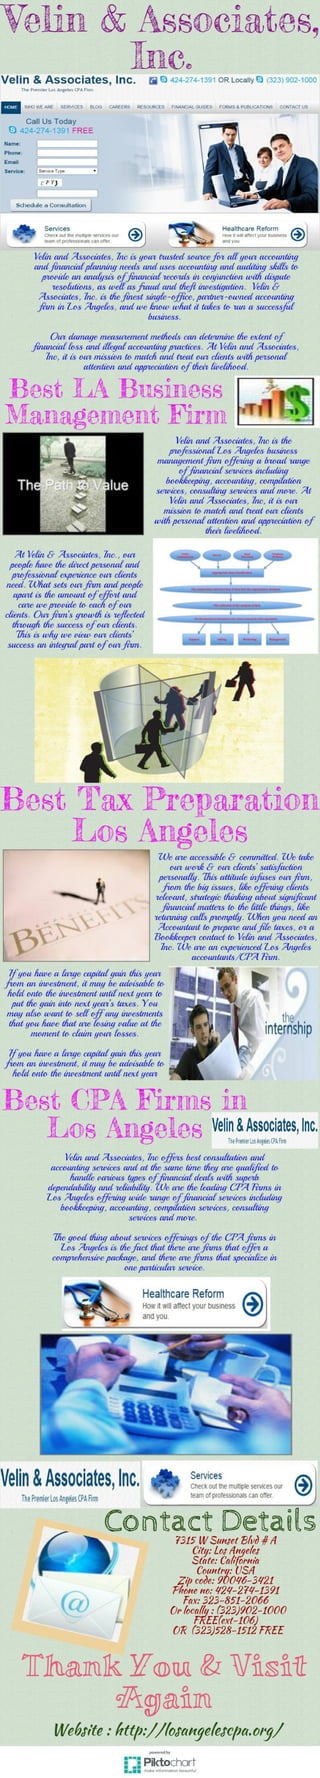 La business management firm and tax preparation